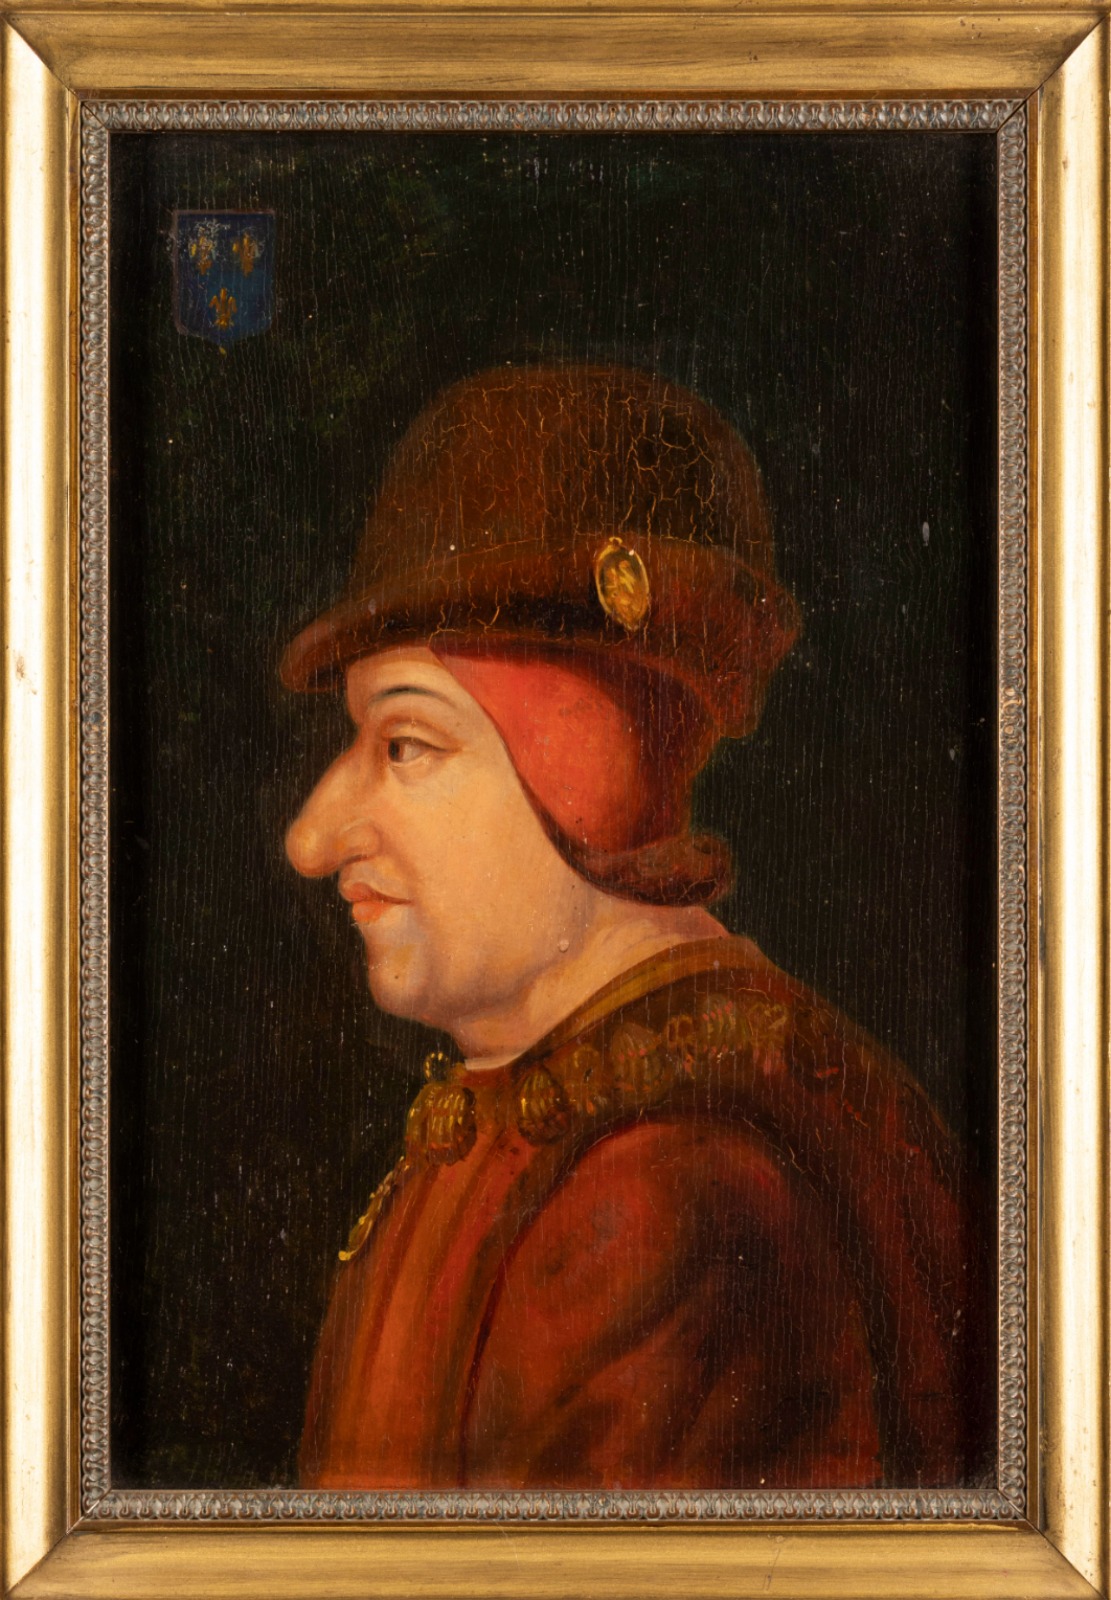 Portrait of Louis XI of France, French school of Fontainebleau 16th - 17th centuries